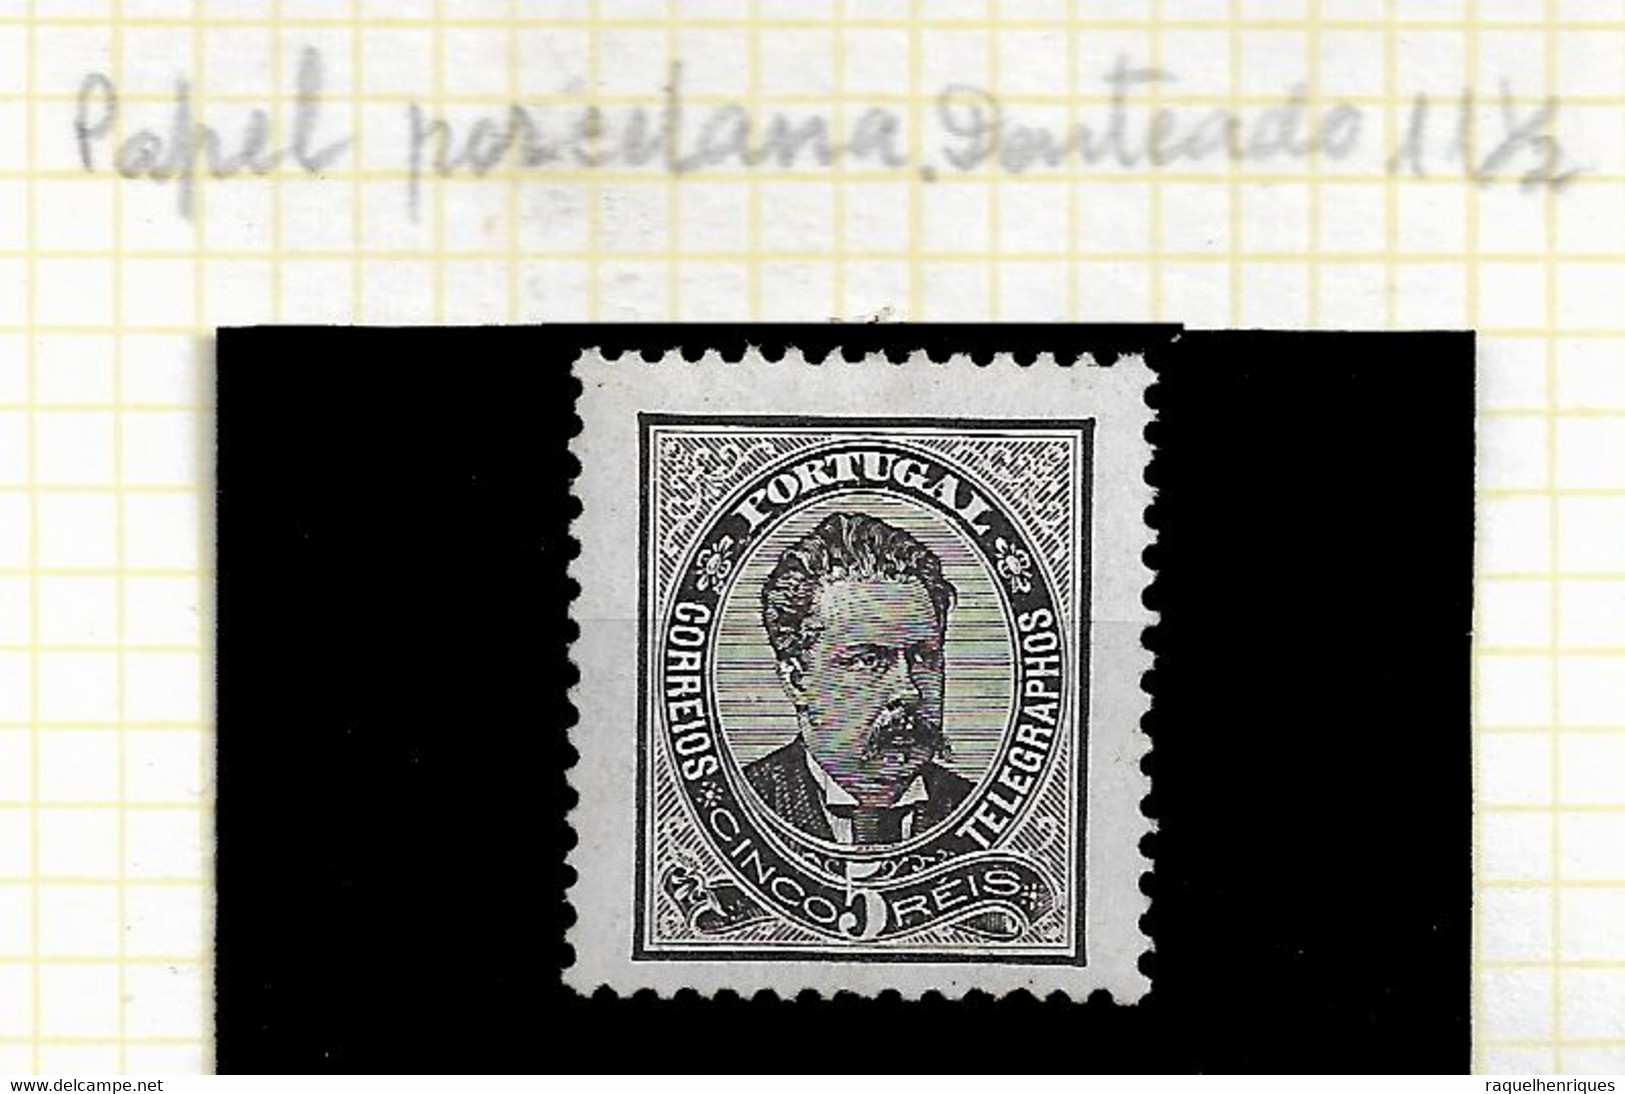 PORTUGAL STAMP - 1884-87 D.LUIS I P.PORCELANA Perf:11½  Md#60a MH (LPT1#204) - Neufs